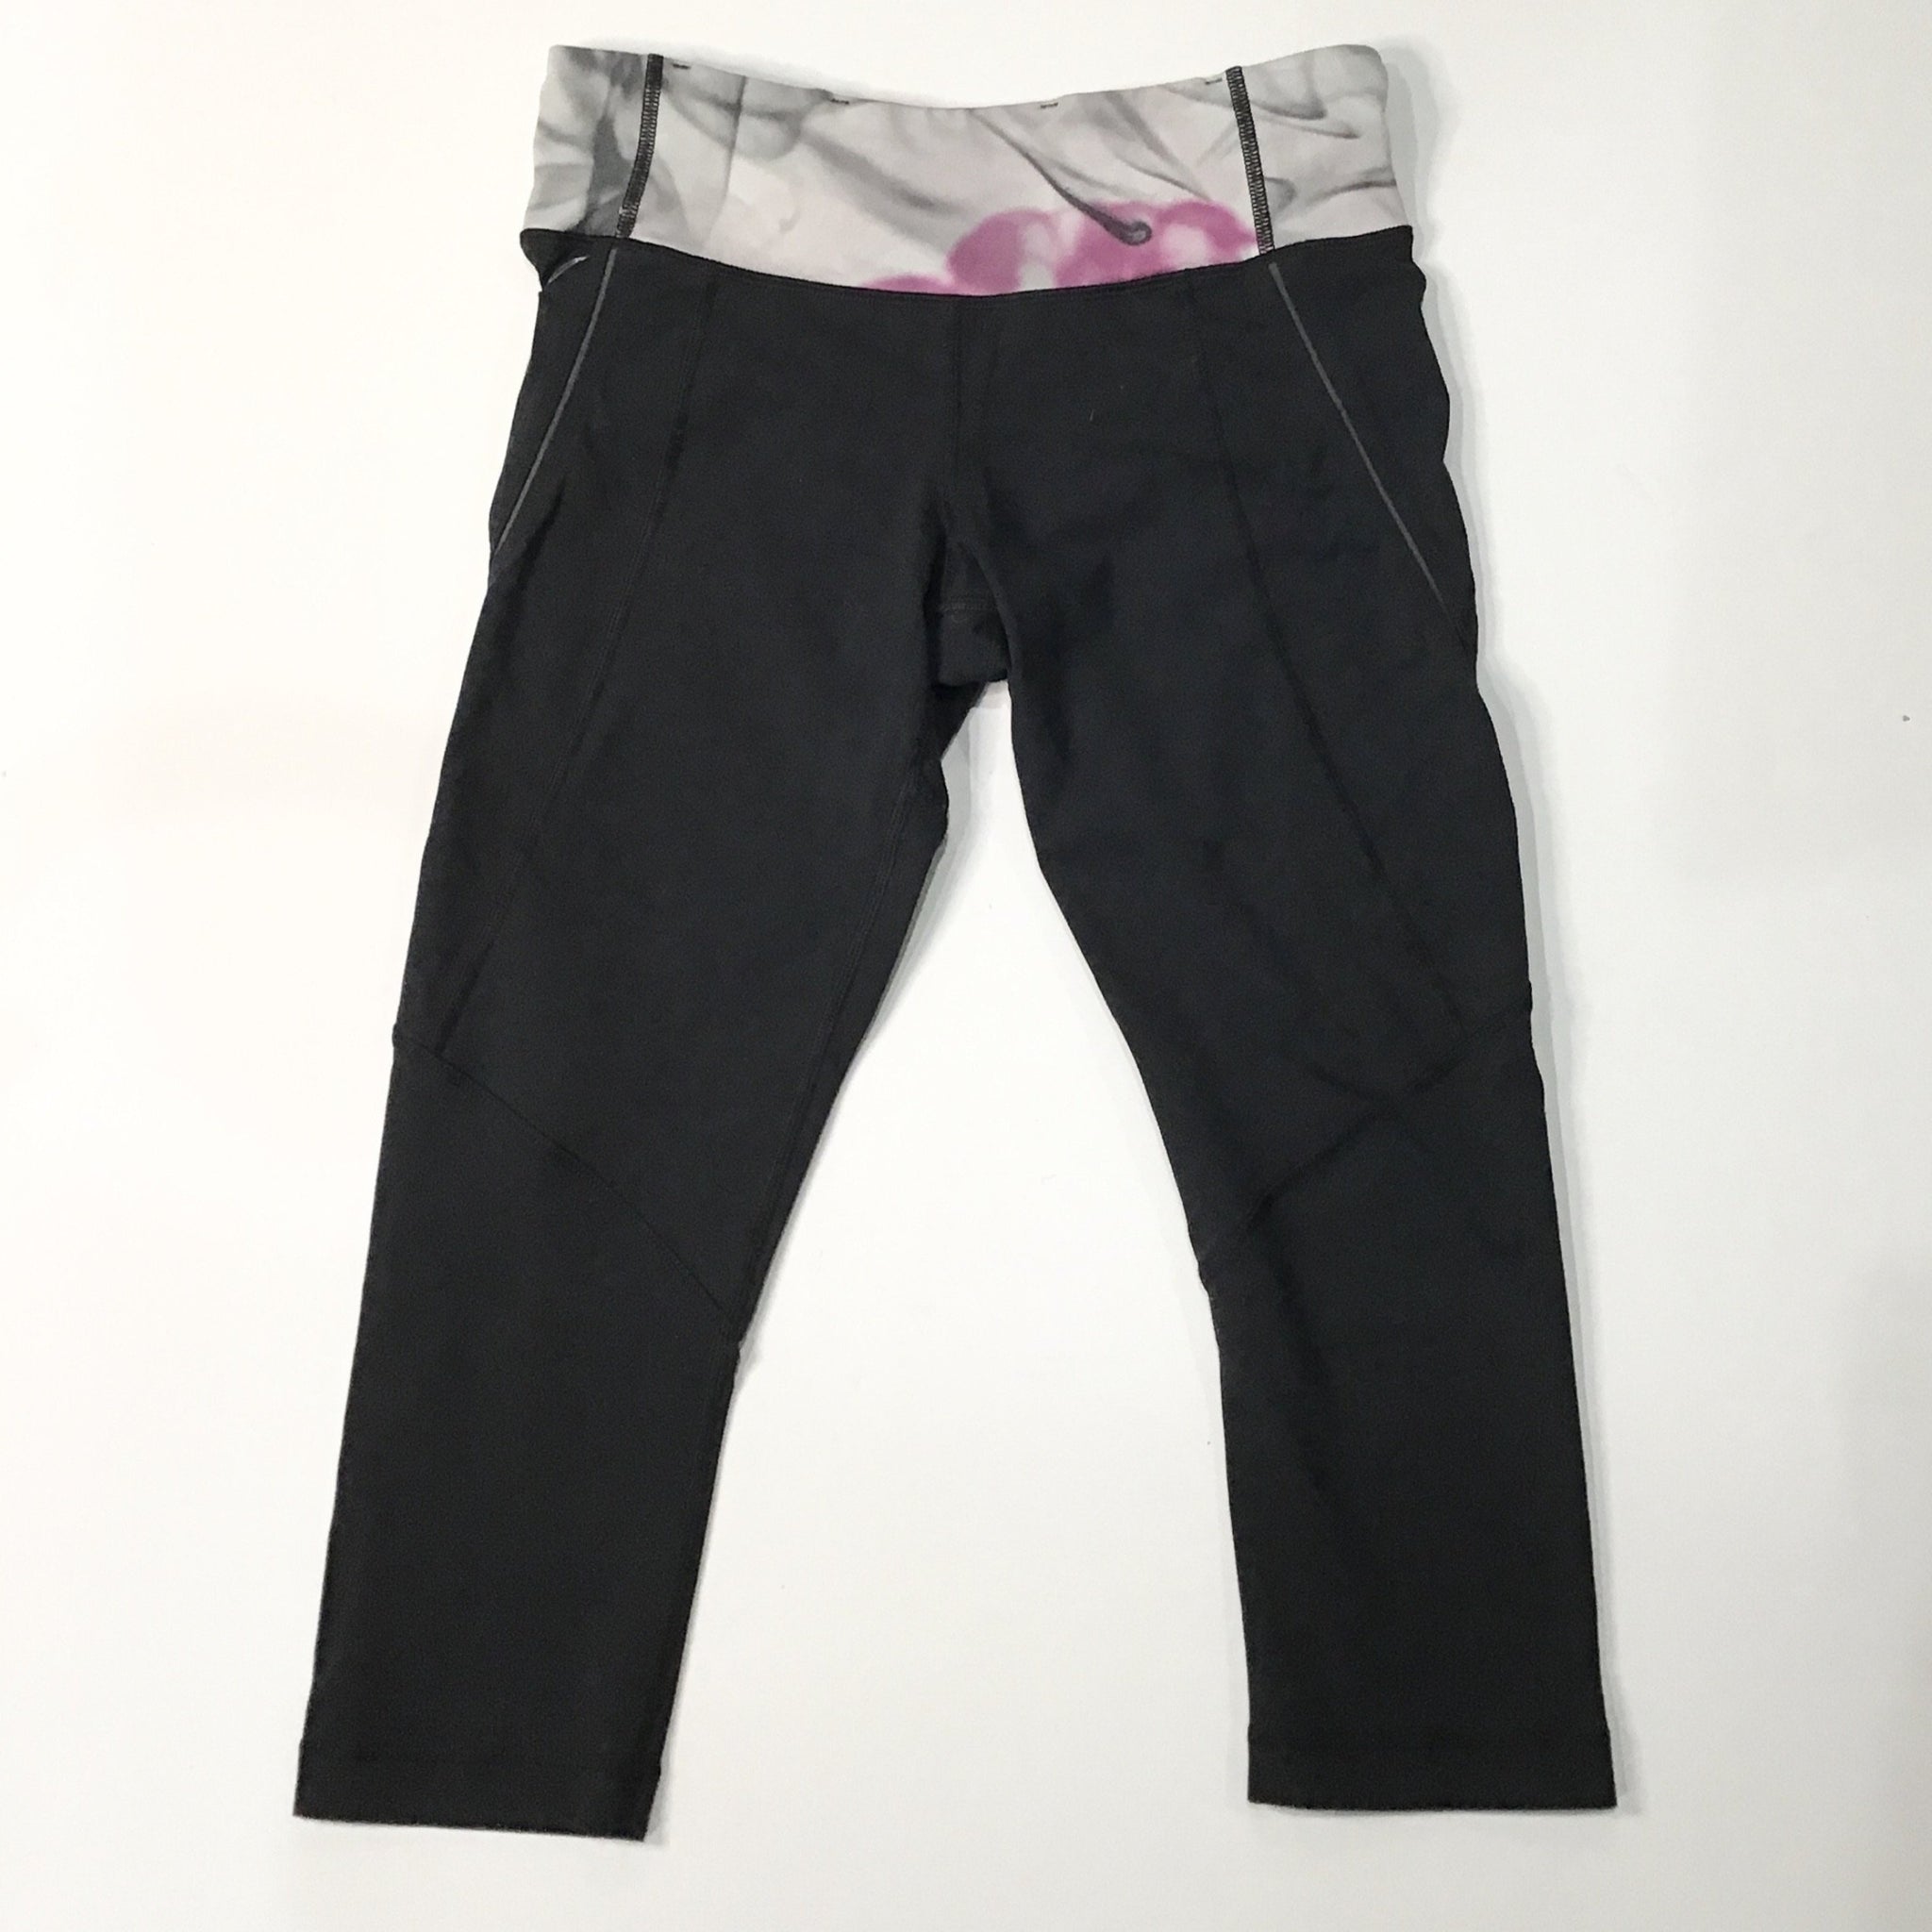 LULULEMON BOX IT OUT POCKET GRAY/BLACK LEGGINGS SIZE 6– WEARHOUSE  CONSIGNMENT